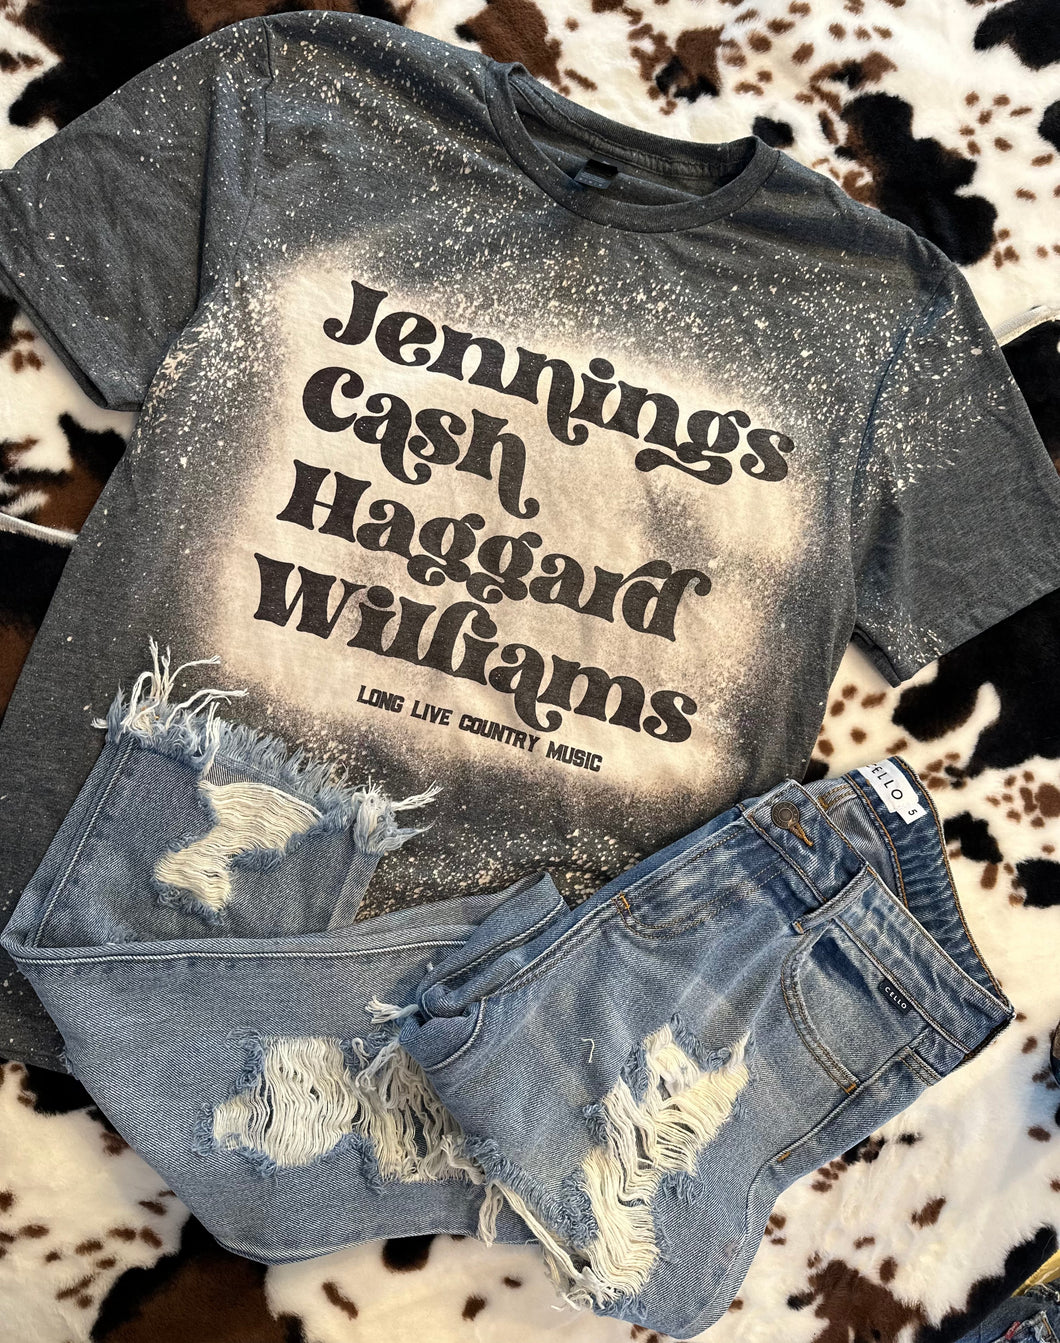 Bleached Jennings Cash Haggard Williams long live country music graphic tee or sweatshirt - Mavictoria Designs Hot Press Express